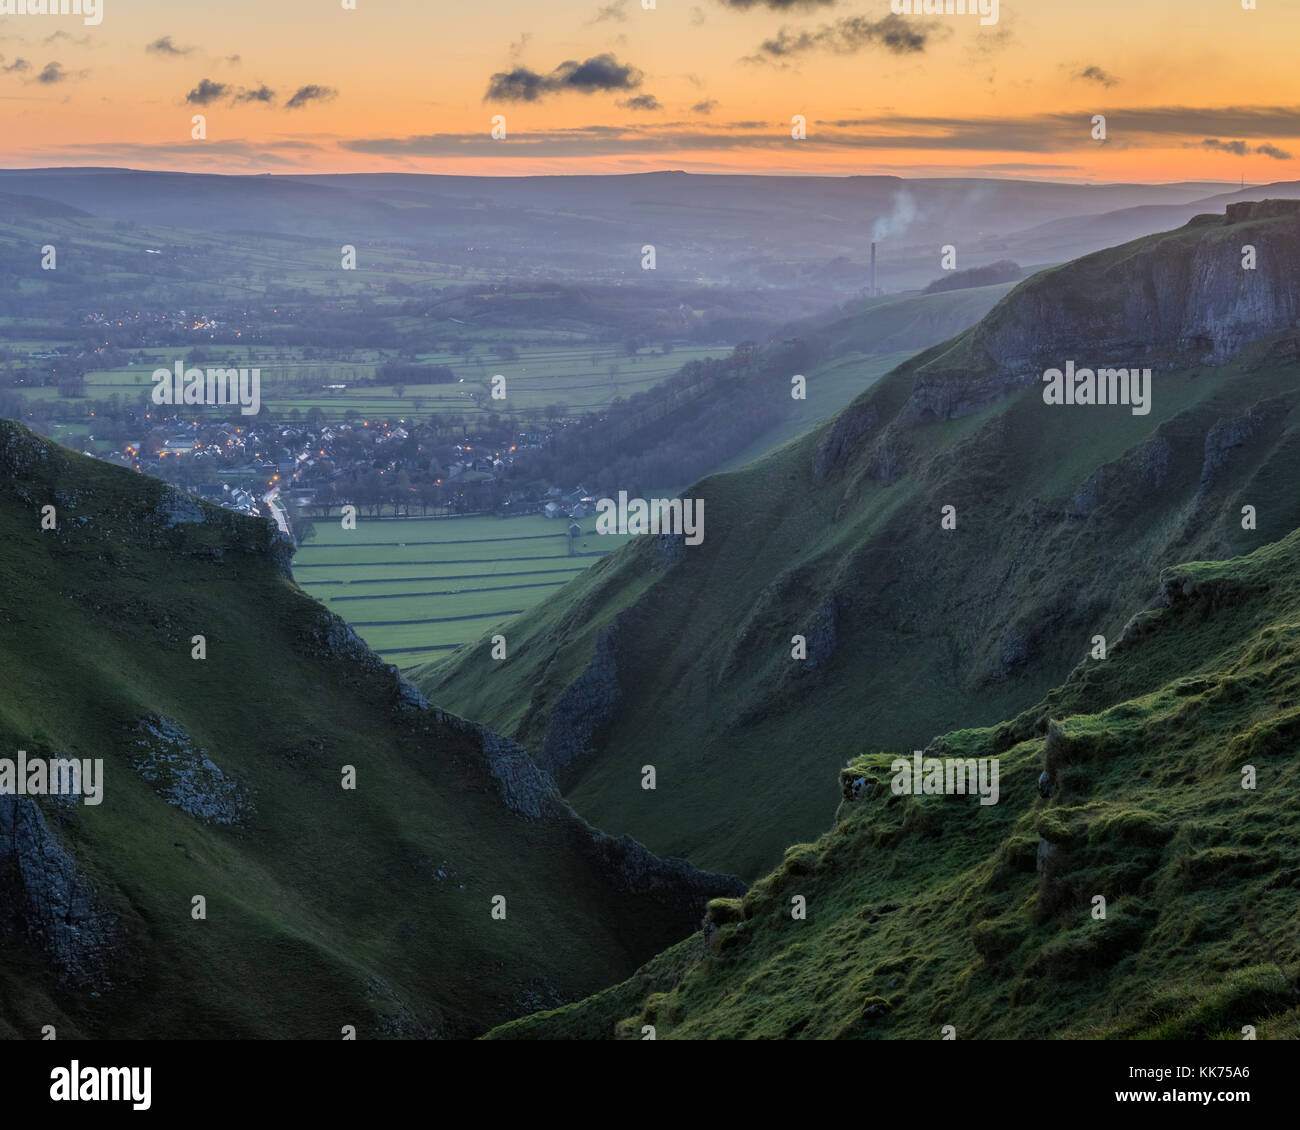 Winnats Pass, Peak District, UK, at Dawn, Sunrise, Early Morning, Looking down the valley from the hilltop Stock Photo